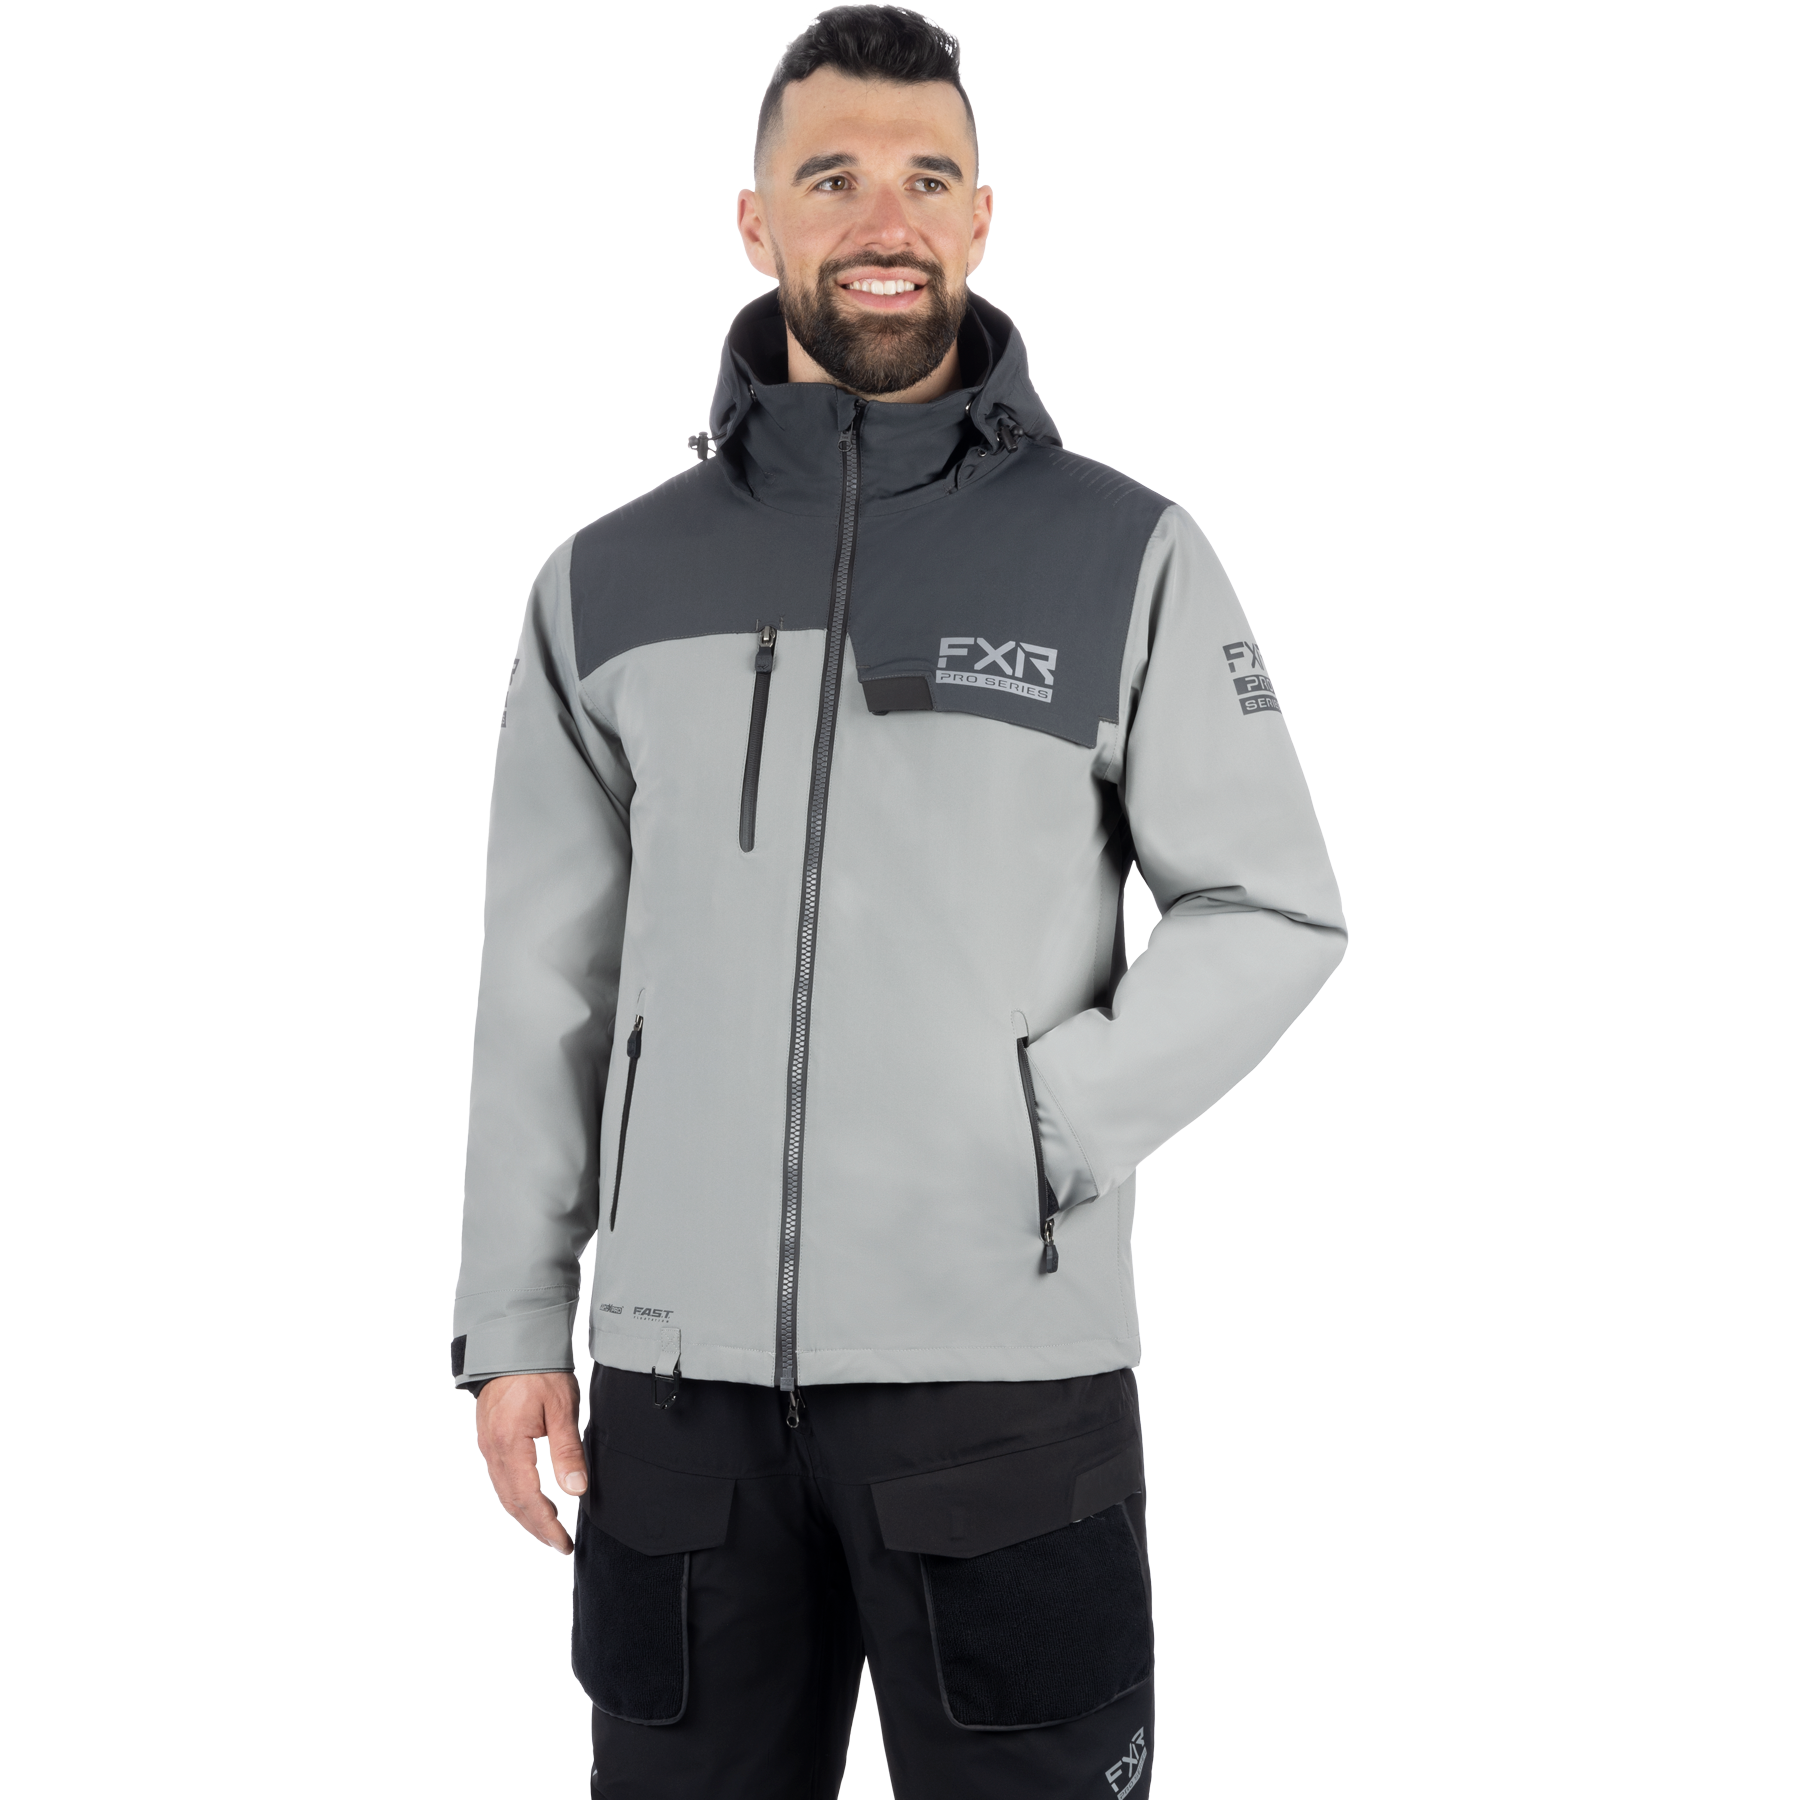 fxr racing jackets  vapor pro insulated jackets - casual